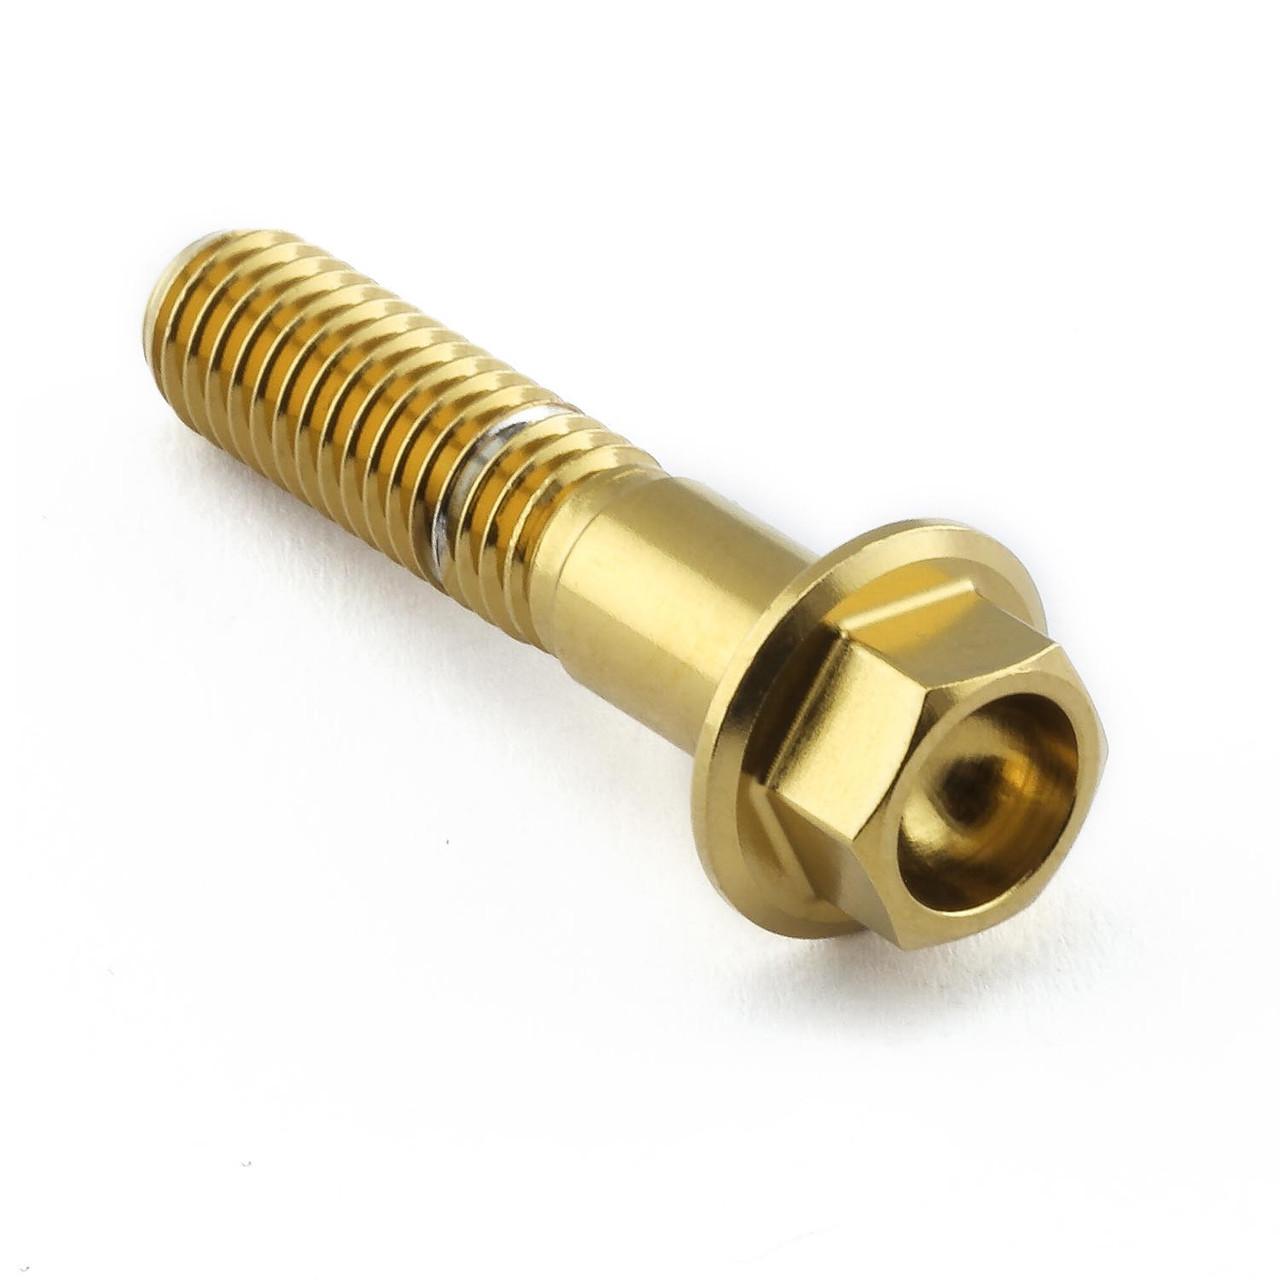 Stainless Steel Flanged Hex Head Bolt M8x(1.25mm)x35mm